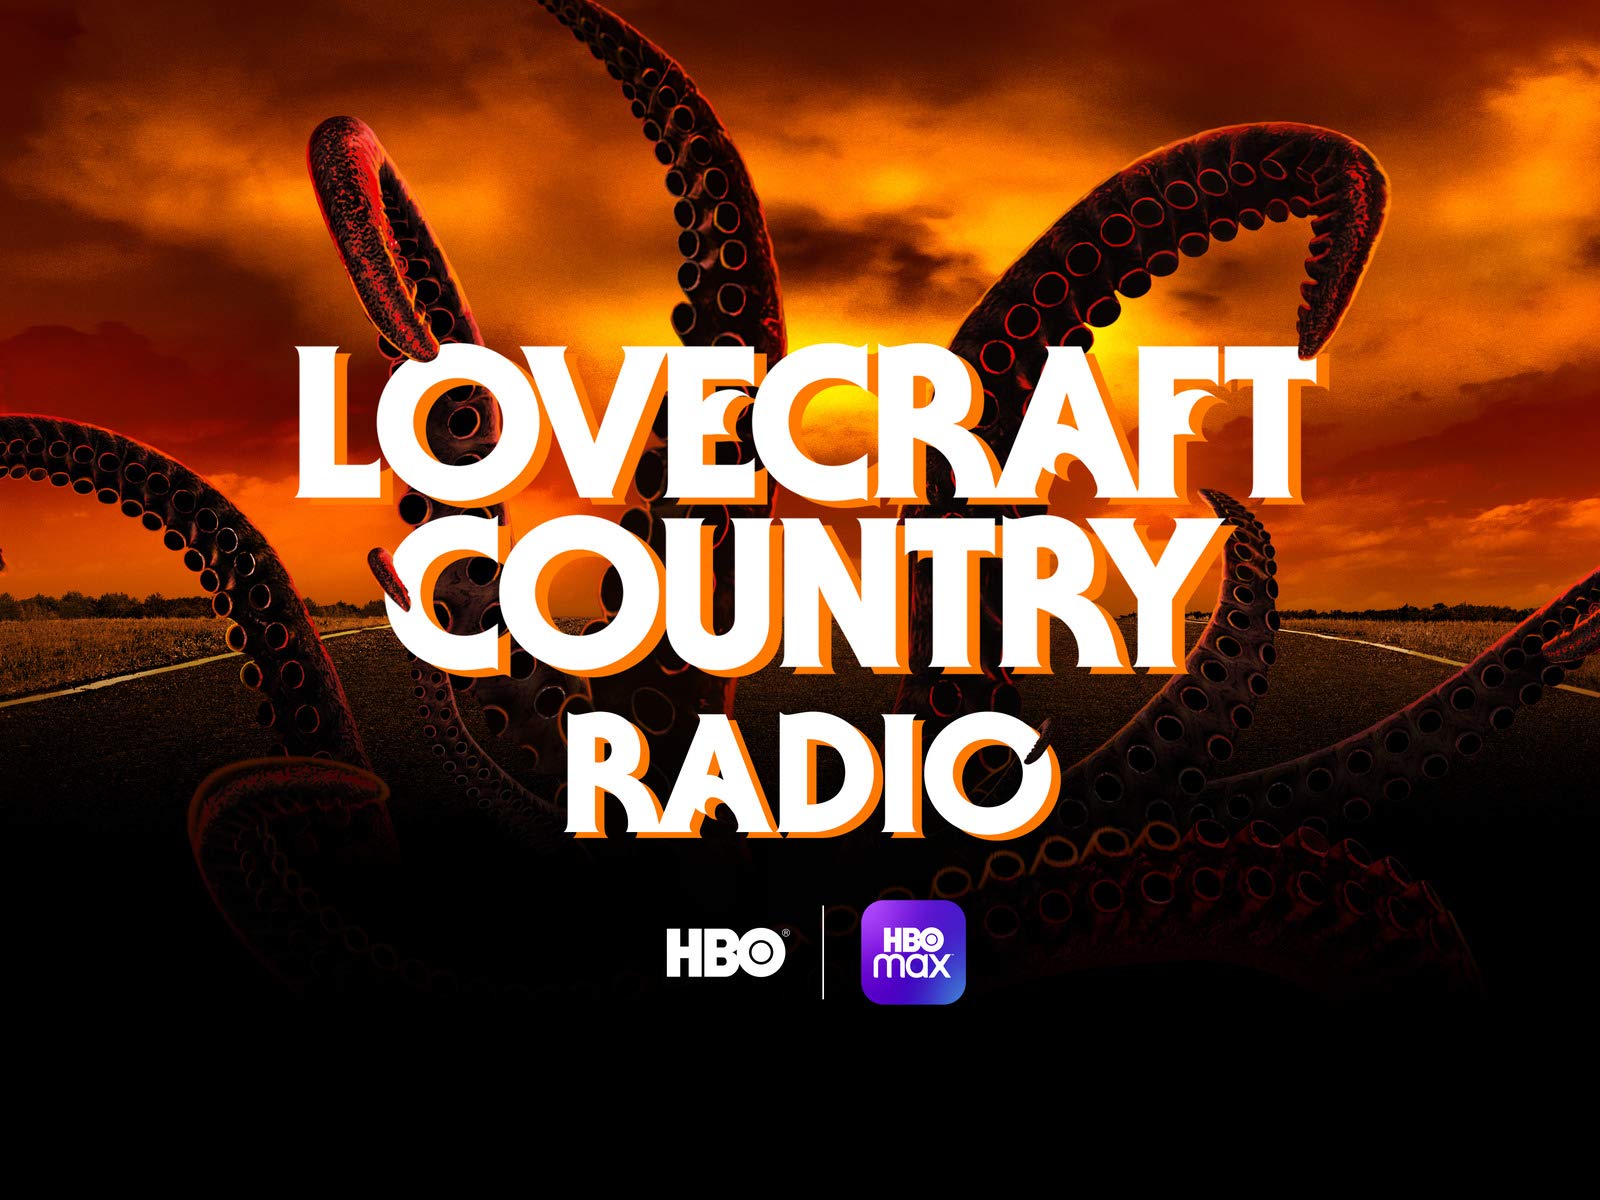 Large tentacles and an orange sky frame the tile, "Lovecraft Country Radio."